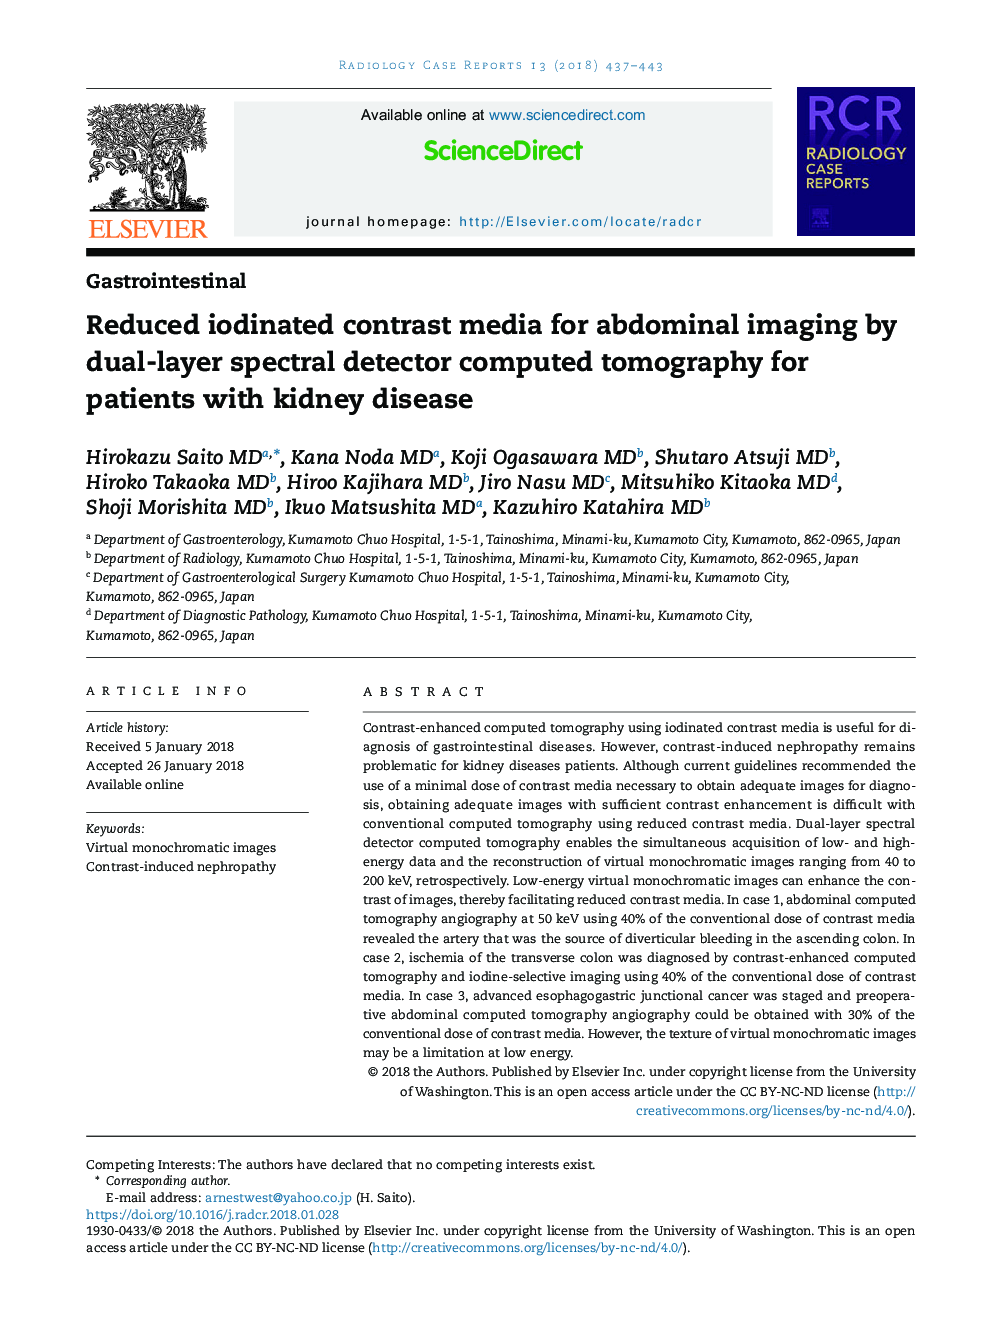 Reduced iodinated contrast media for abdominal imaging by dual-layer spectral detector computed tomography for patients with kidney disease